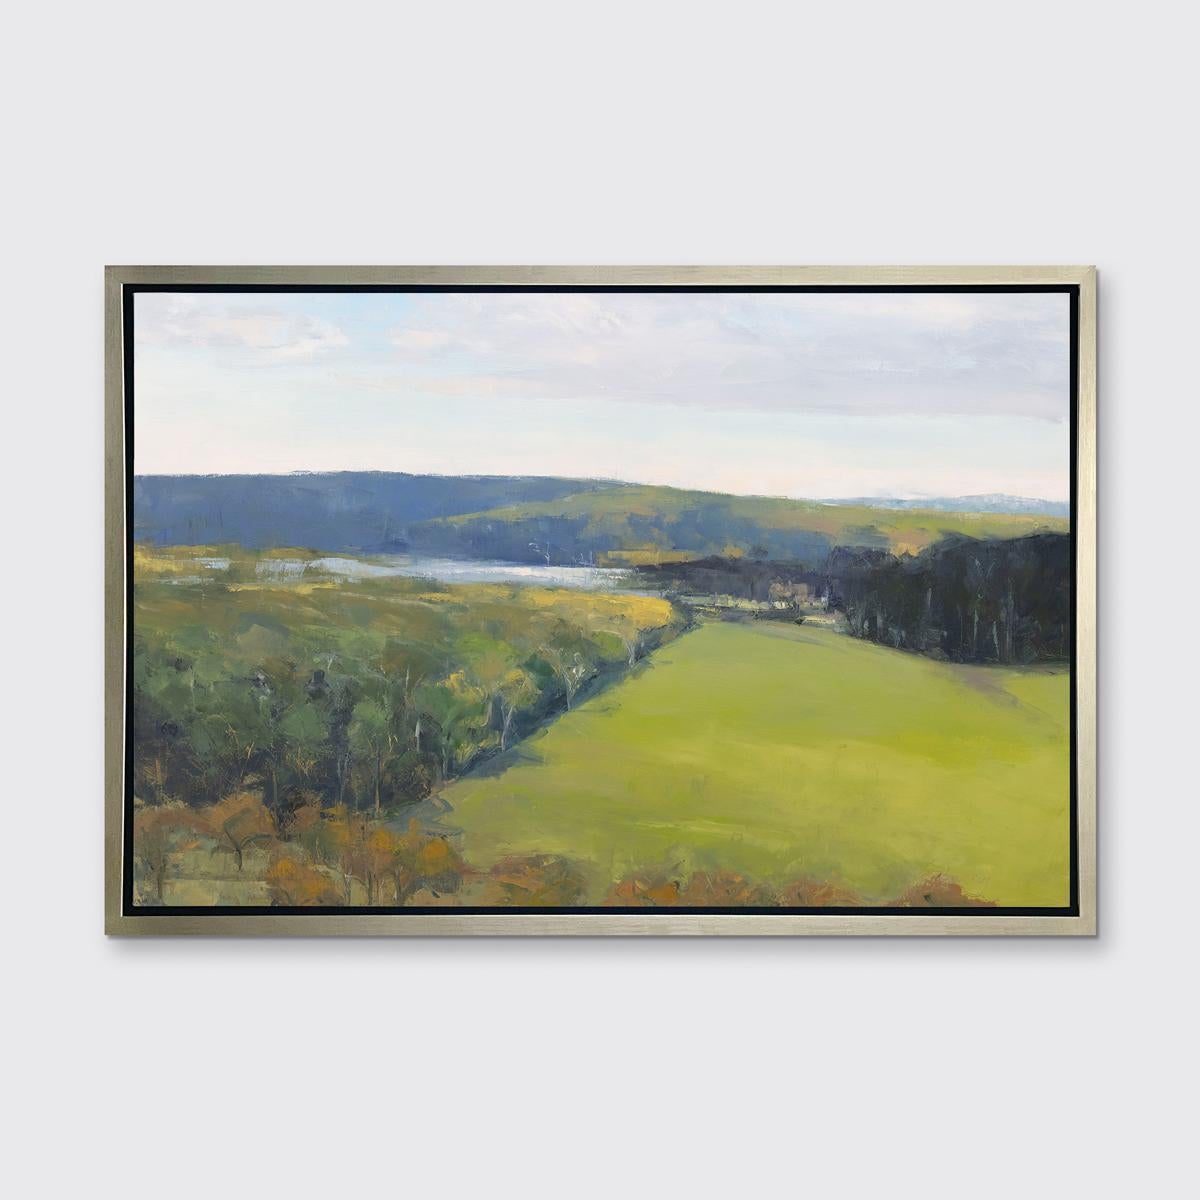 Molly Doe Wensberg Landscape Print - "Green Day" Framed Limited Edition Print, 24" x 36"